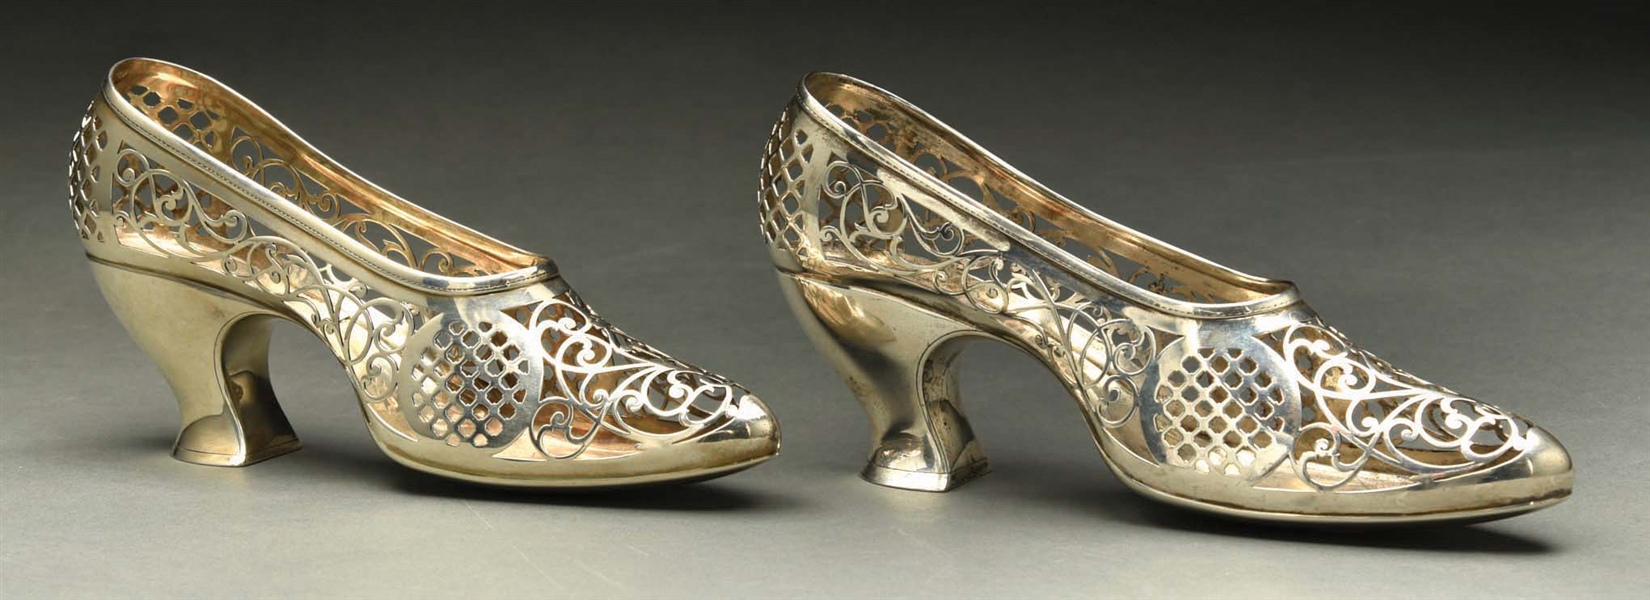 A PAIR OF GORHAM STERLING POTPOURRI SHOES.